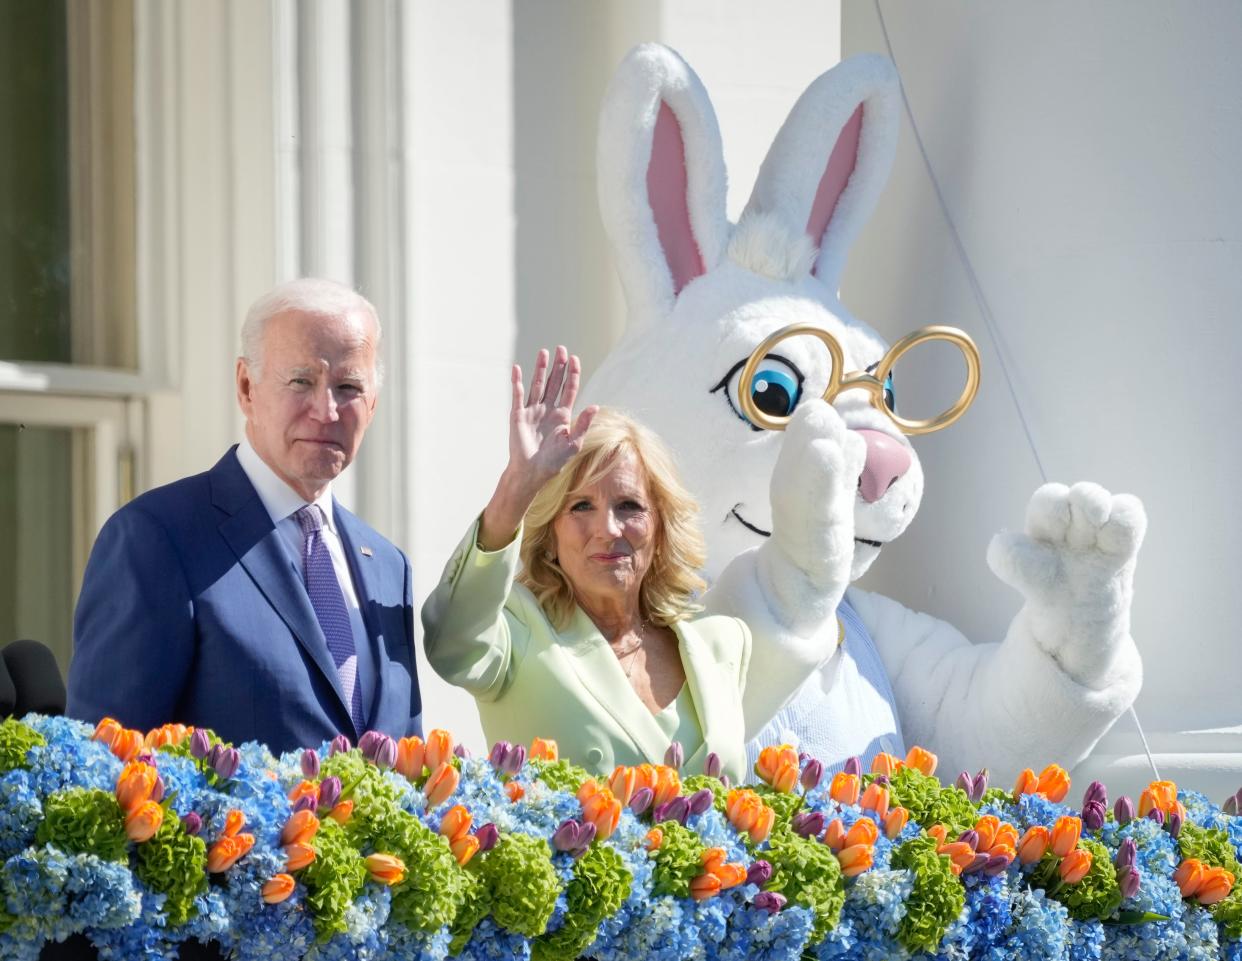 Apr 10, 2023; Washington, DC, USA; President Joe Biden and First lady Jill Biden welcome people to the annual Easter Egg Roll on the South Lawn of the White House on Monday, April 10, 2023. In addition to the traditional egg roll and egg hunt, the event features educational activities and special performances.. Mandatory Credit: Jack Gruber-USA TODAY ORG XMIT: USAT-708198 (Via OlyDrop)